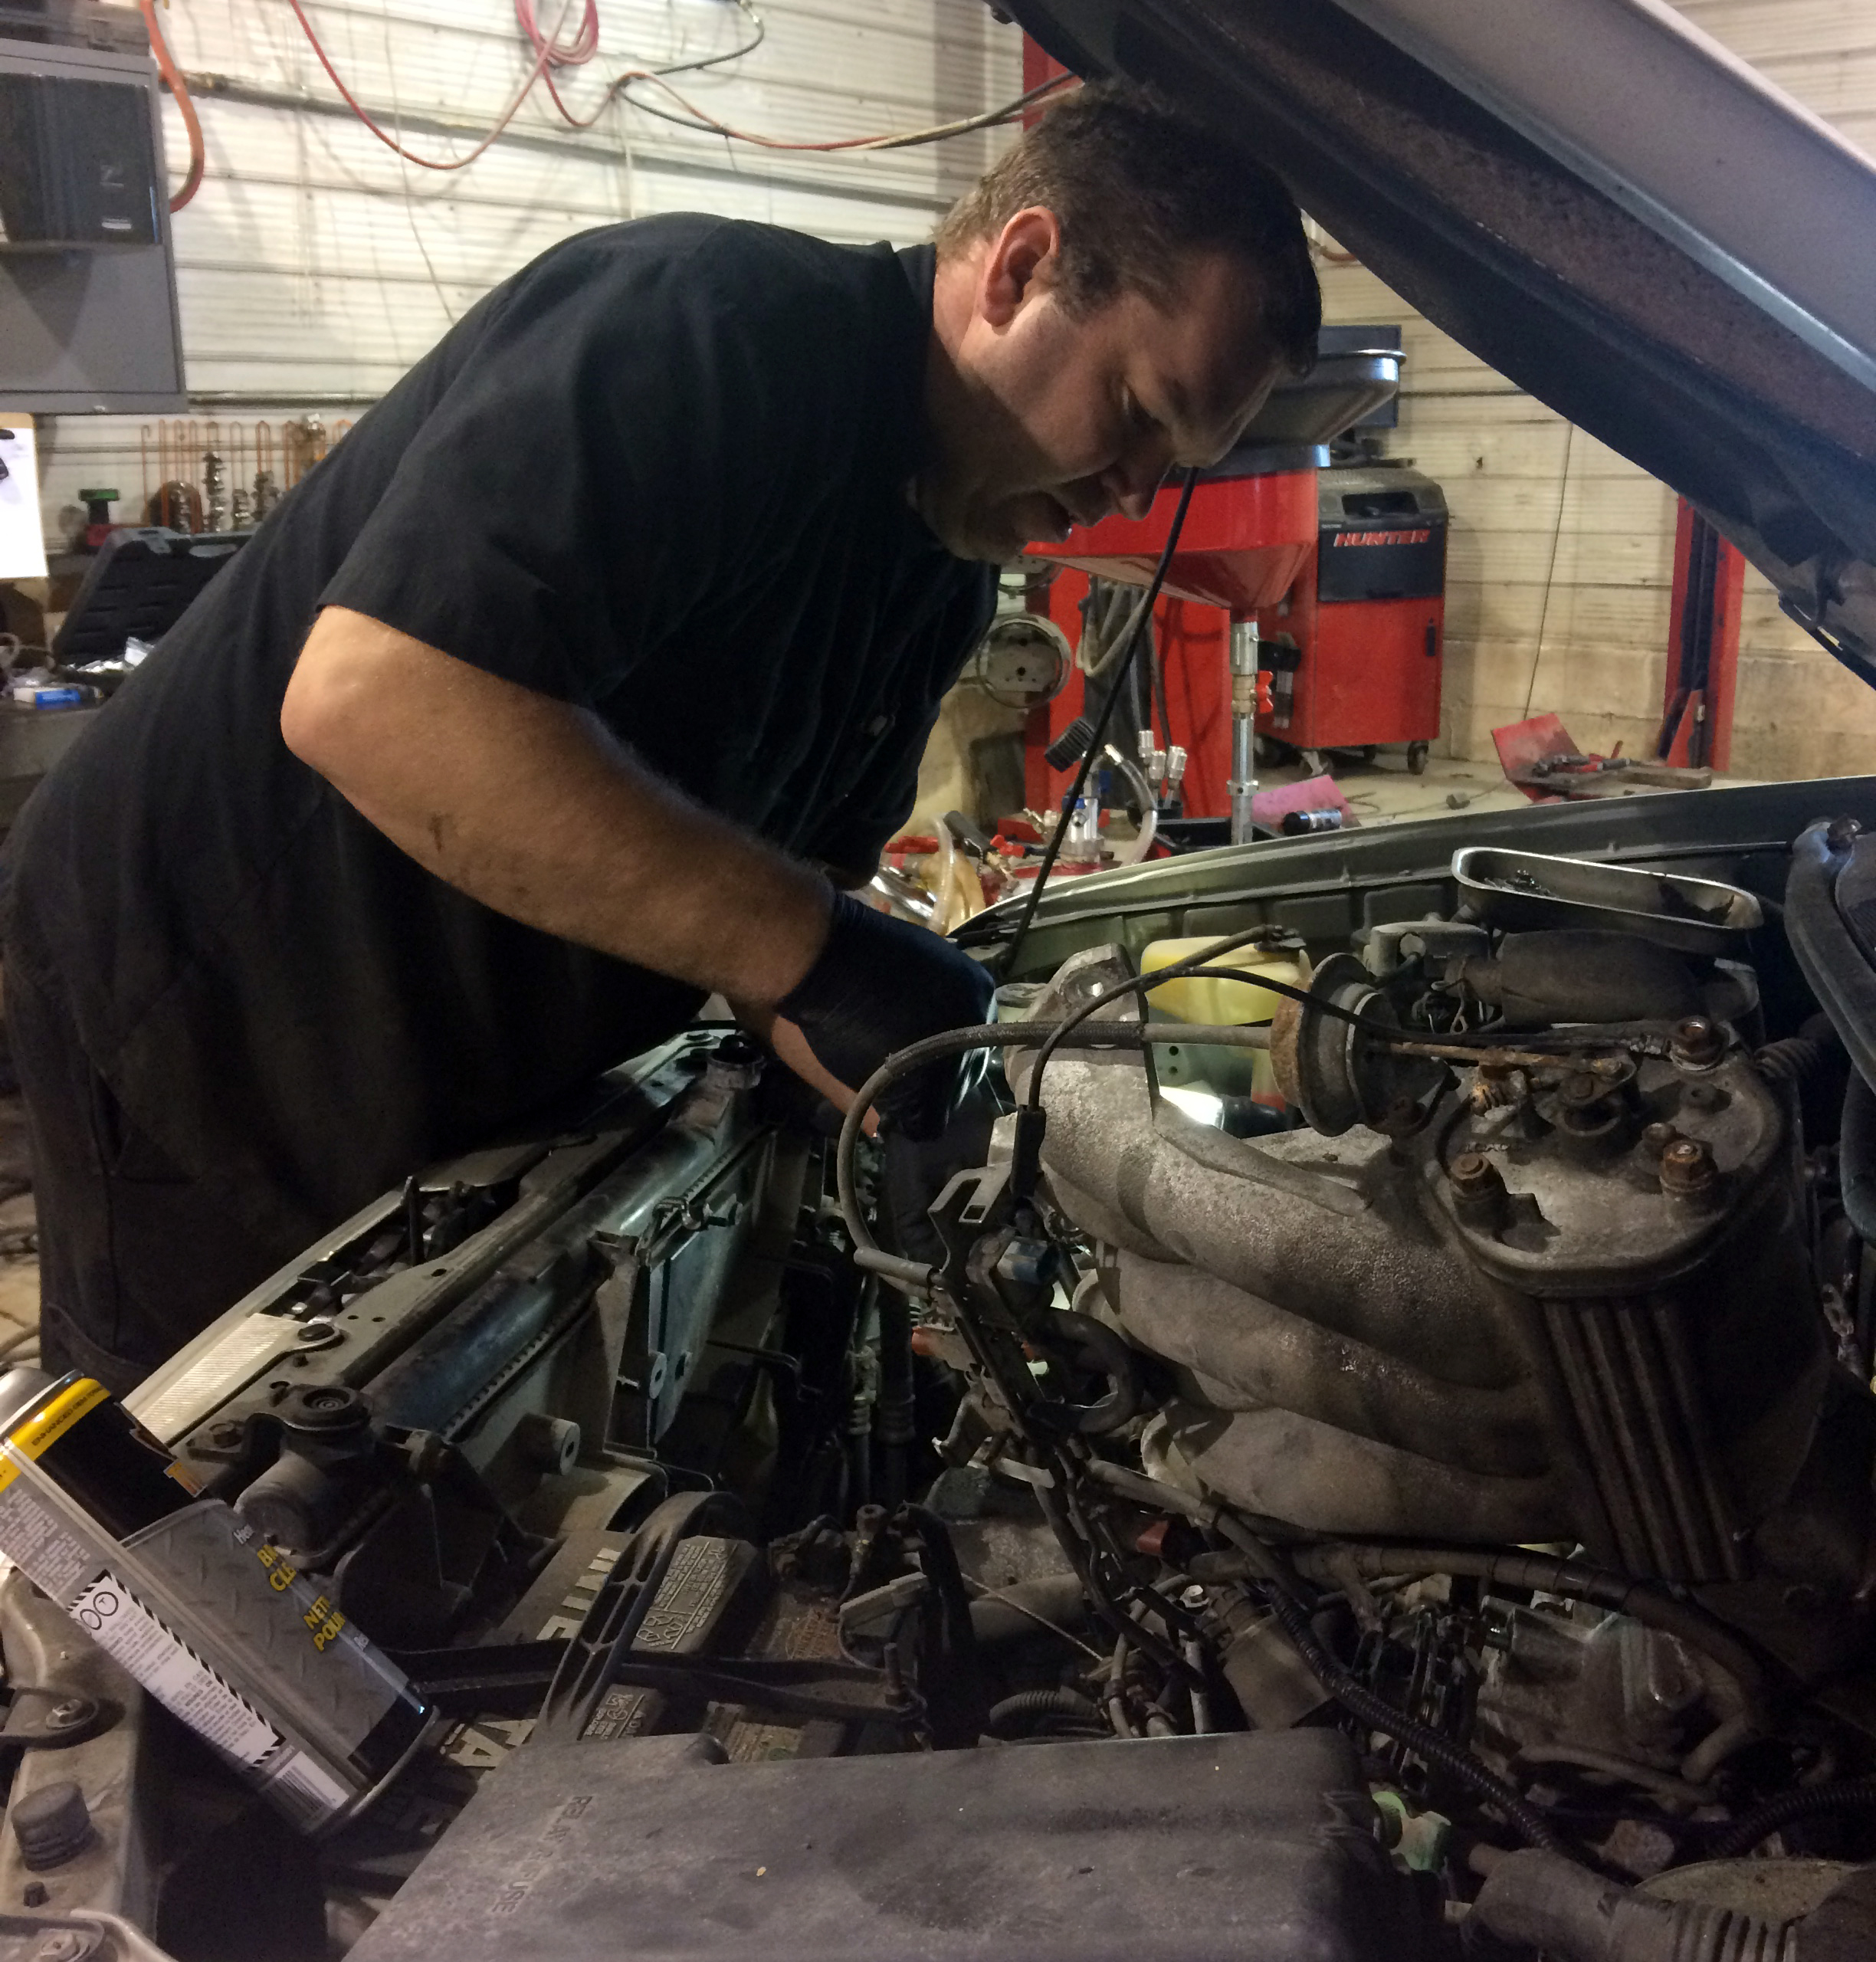 Quality repair services at Hometown Automotive, Woodstock Ontario